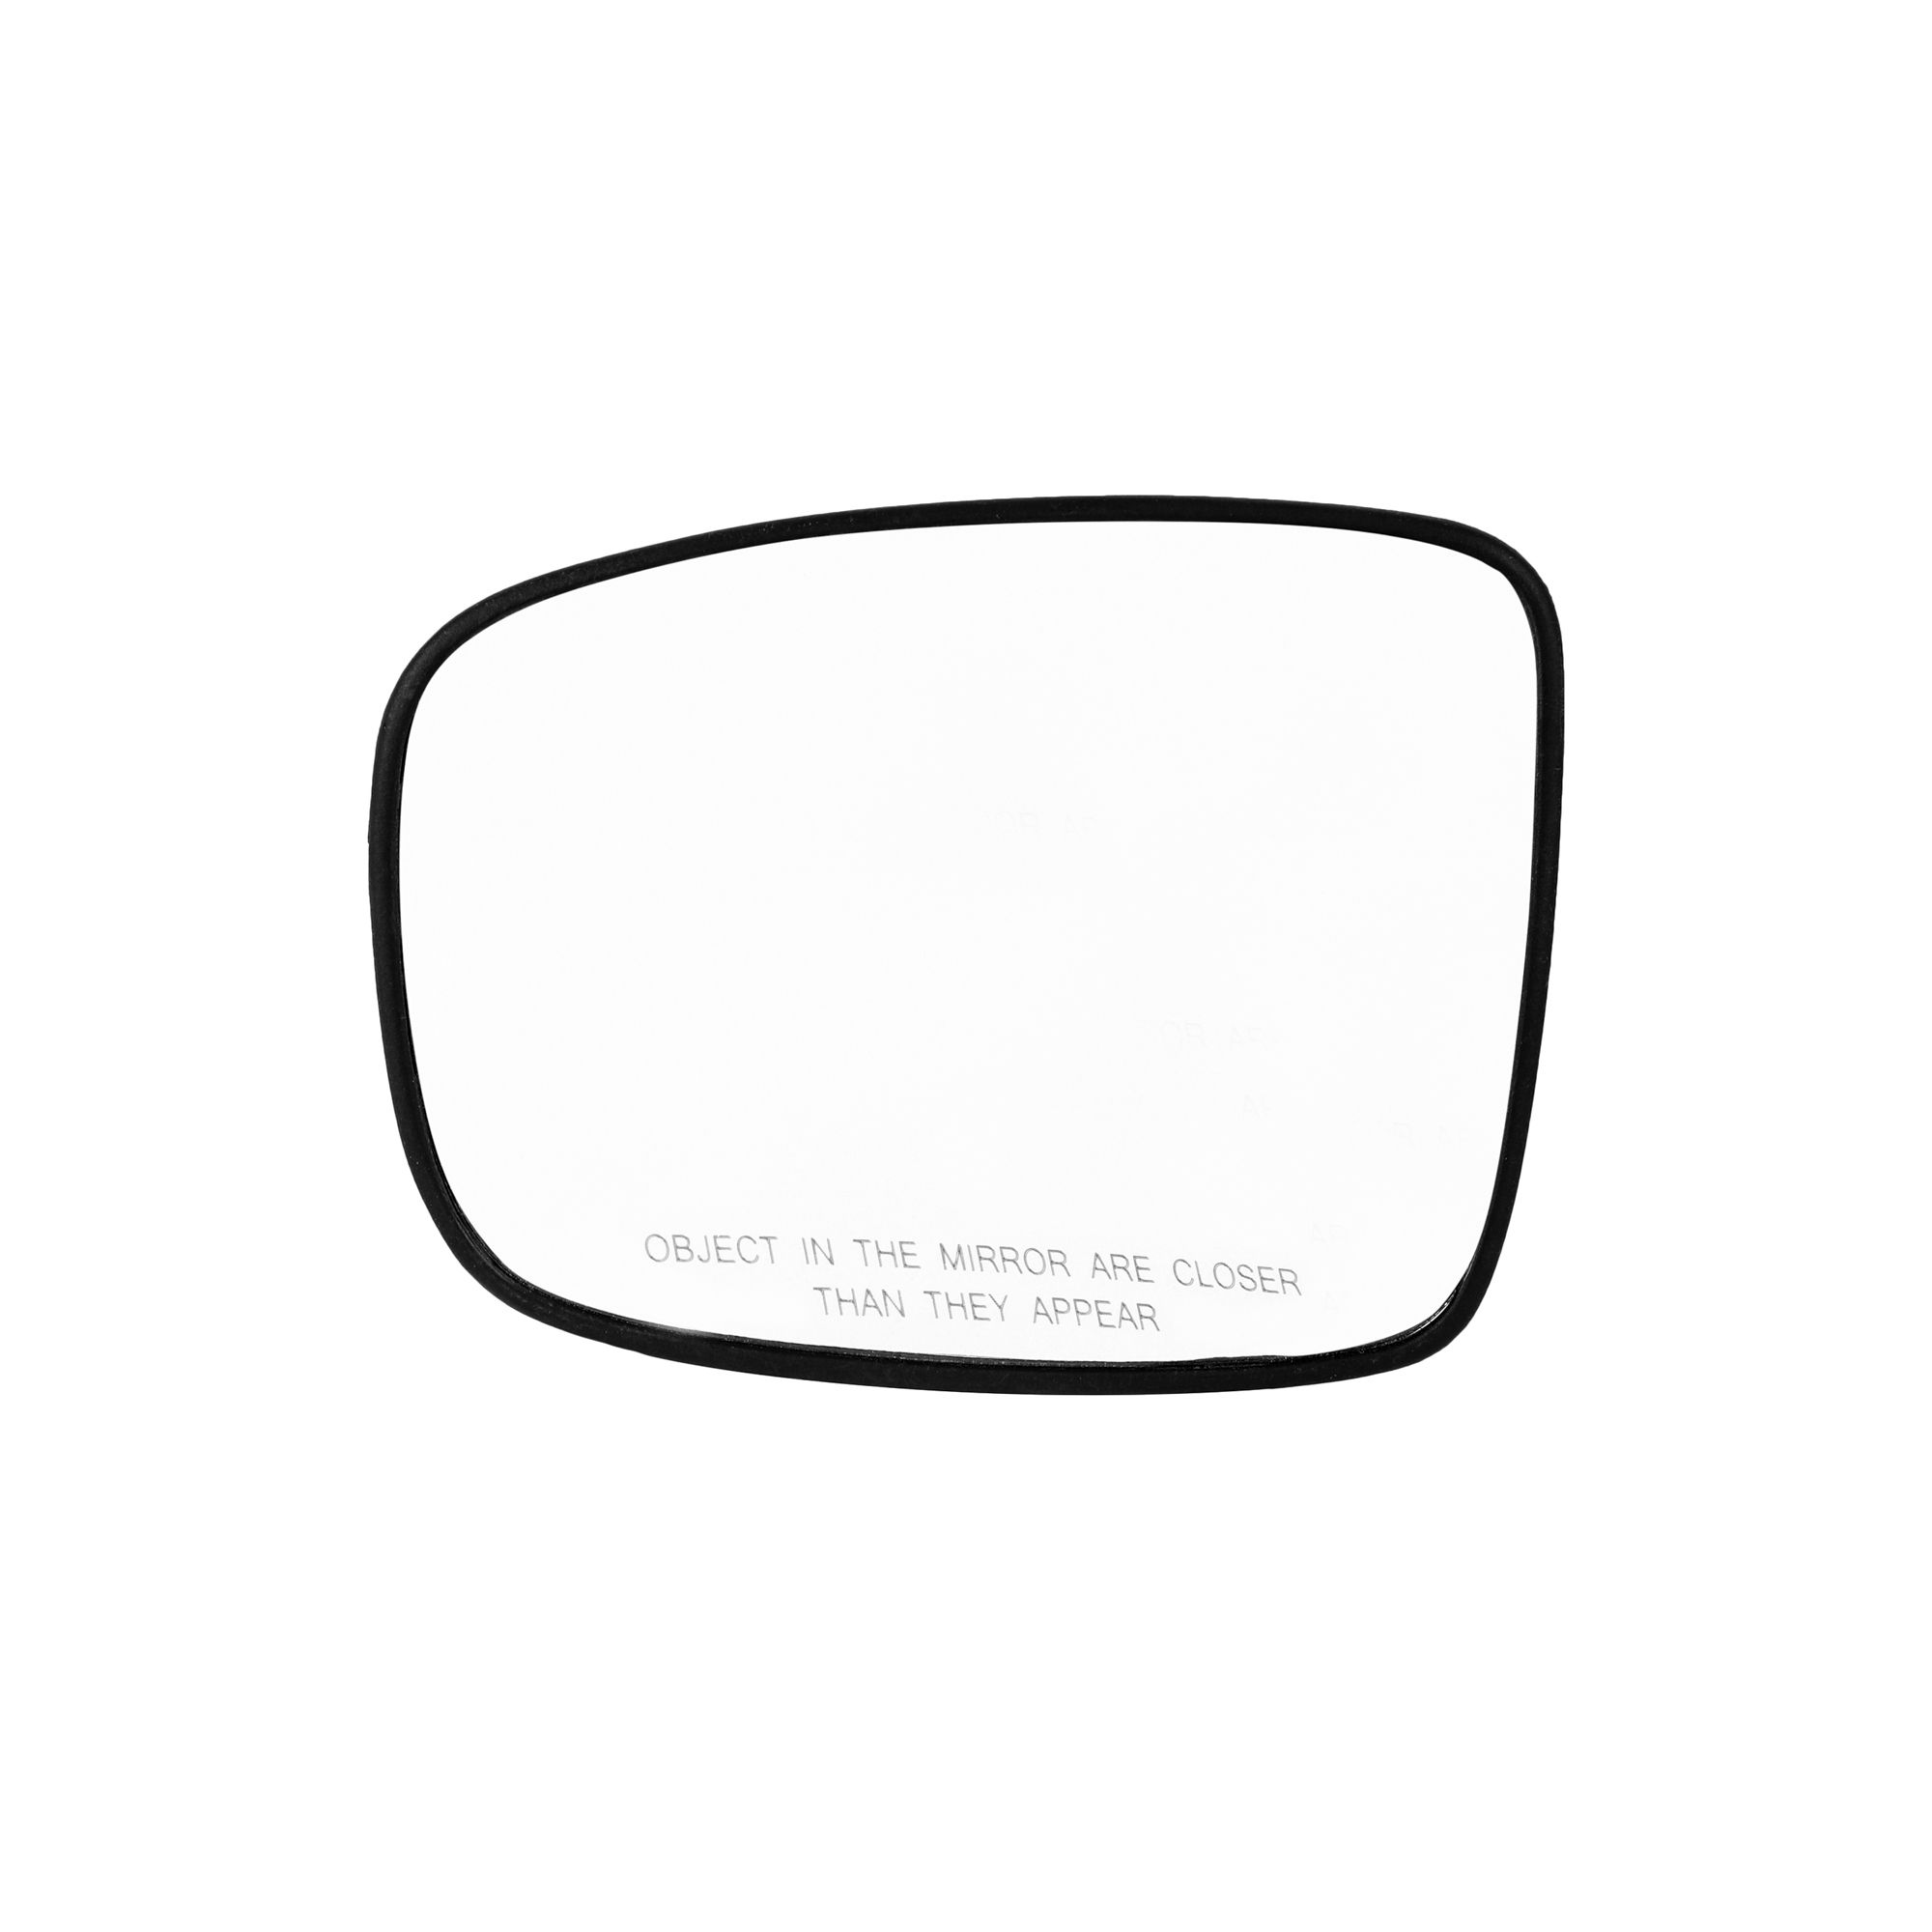 RMC Car Side Mirror Glass Plate (Sub Mirror Plate) suitable for Hyundai i10 (2007-2012).